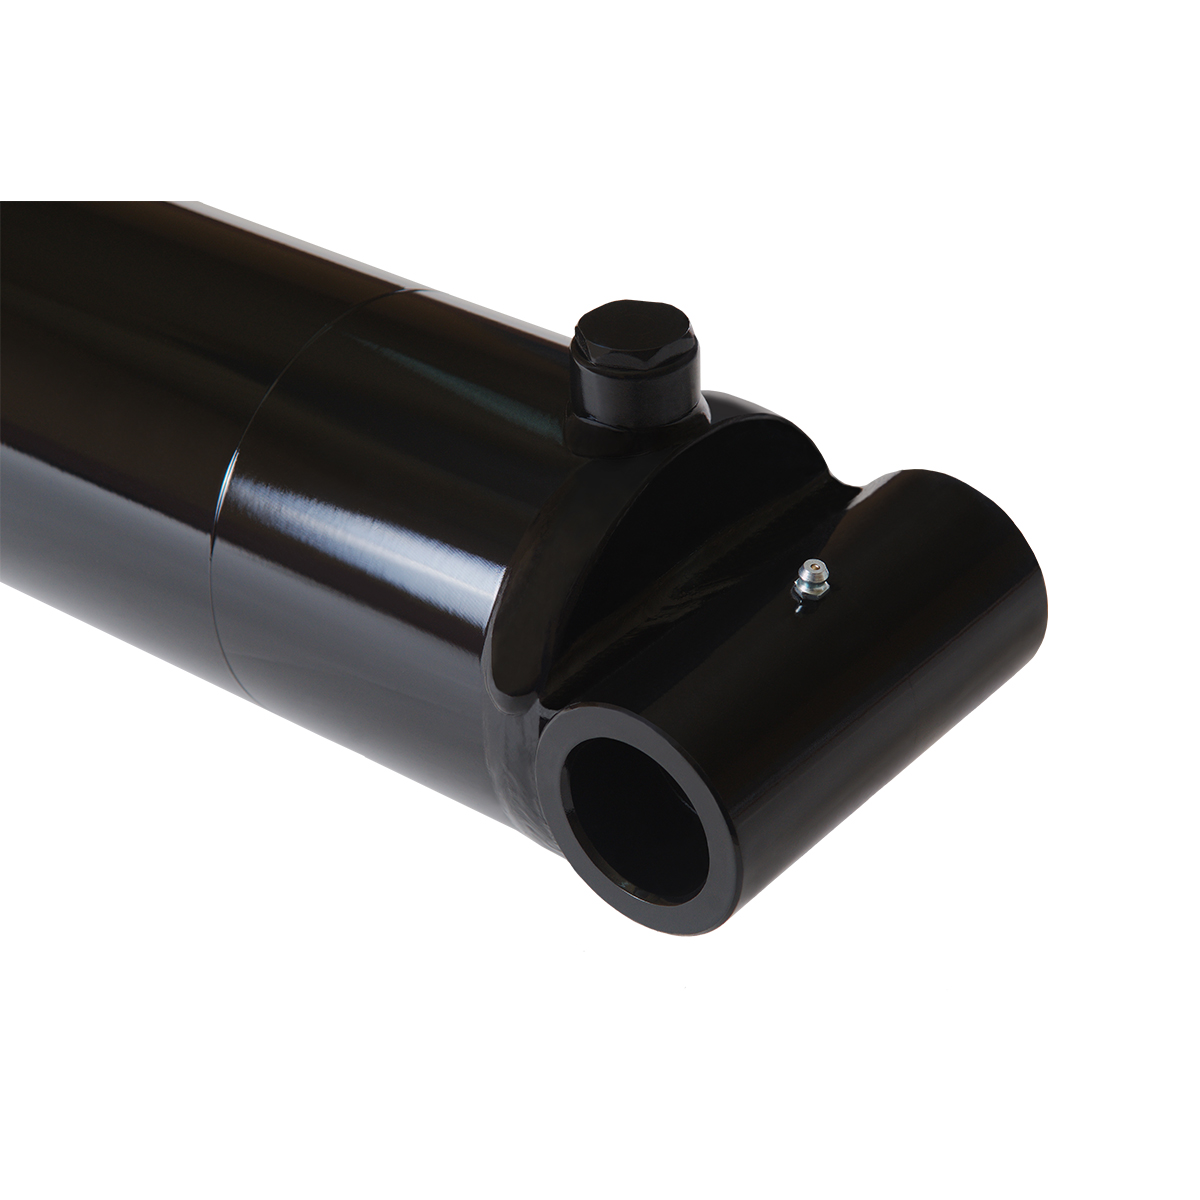 4 bore x 16 stroke hydraulic cylinder, welded cross tube double acting cylinder | Magister Hydraulics